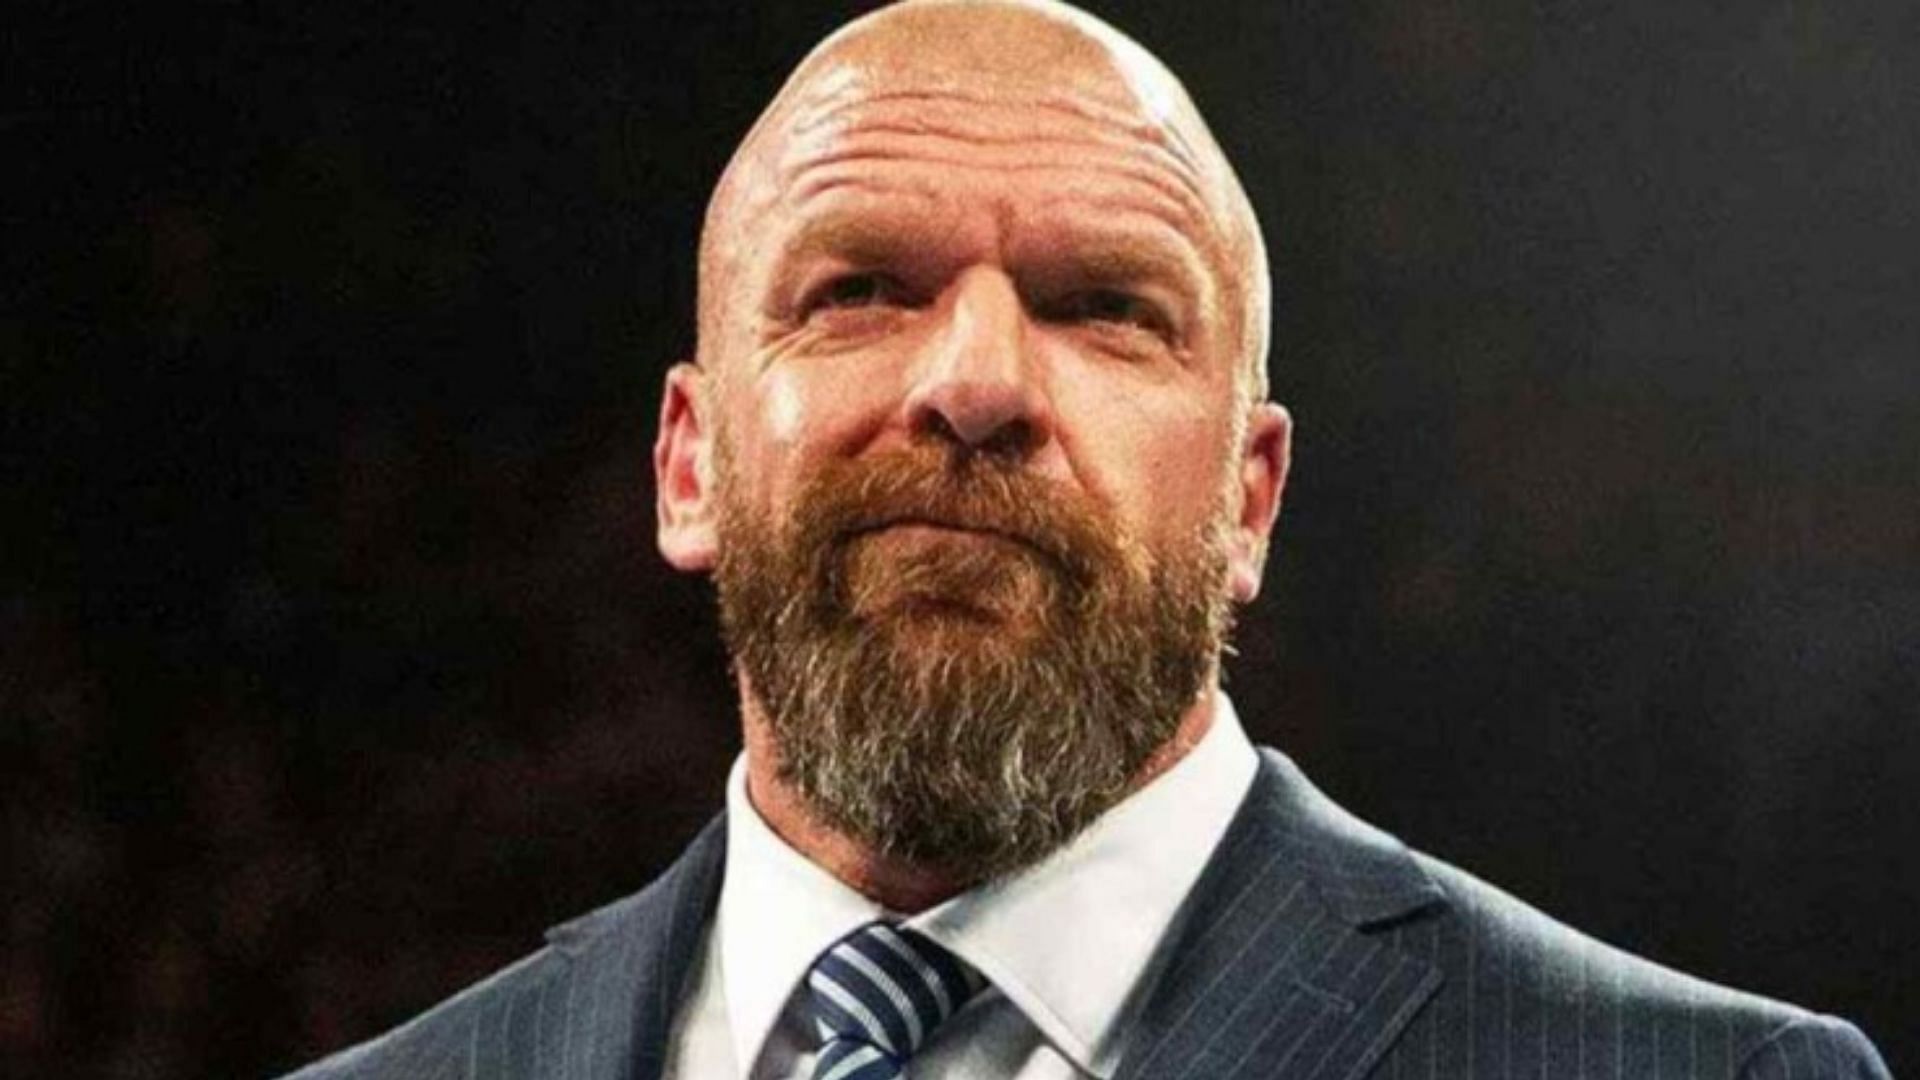 Triple H is the lead in WWE for everything creative